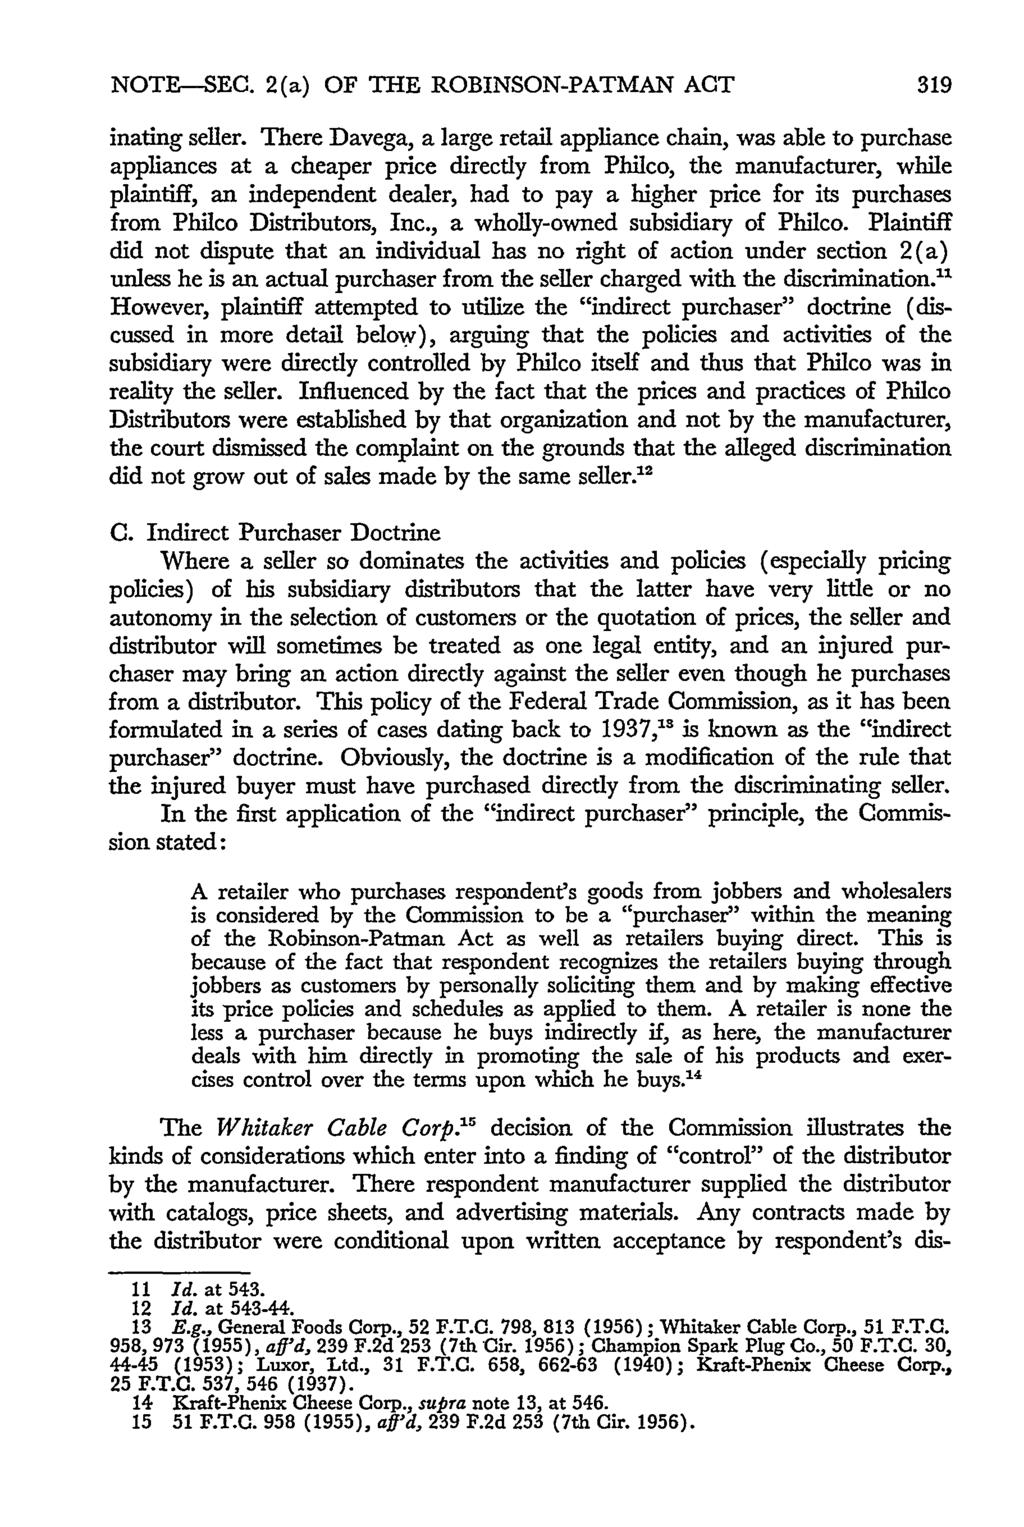 NOTE-SEC. 2(a) OF THE ROBINSON-PATMAN ACT inating seller.